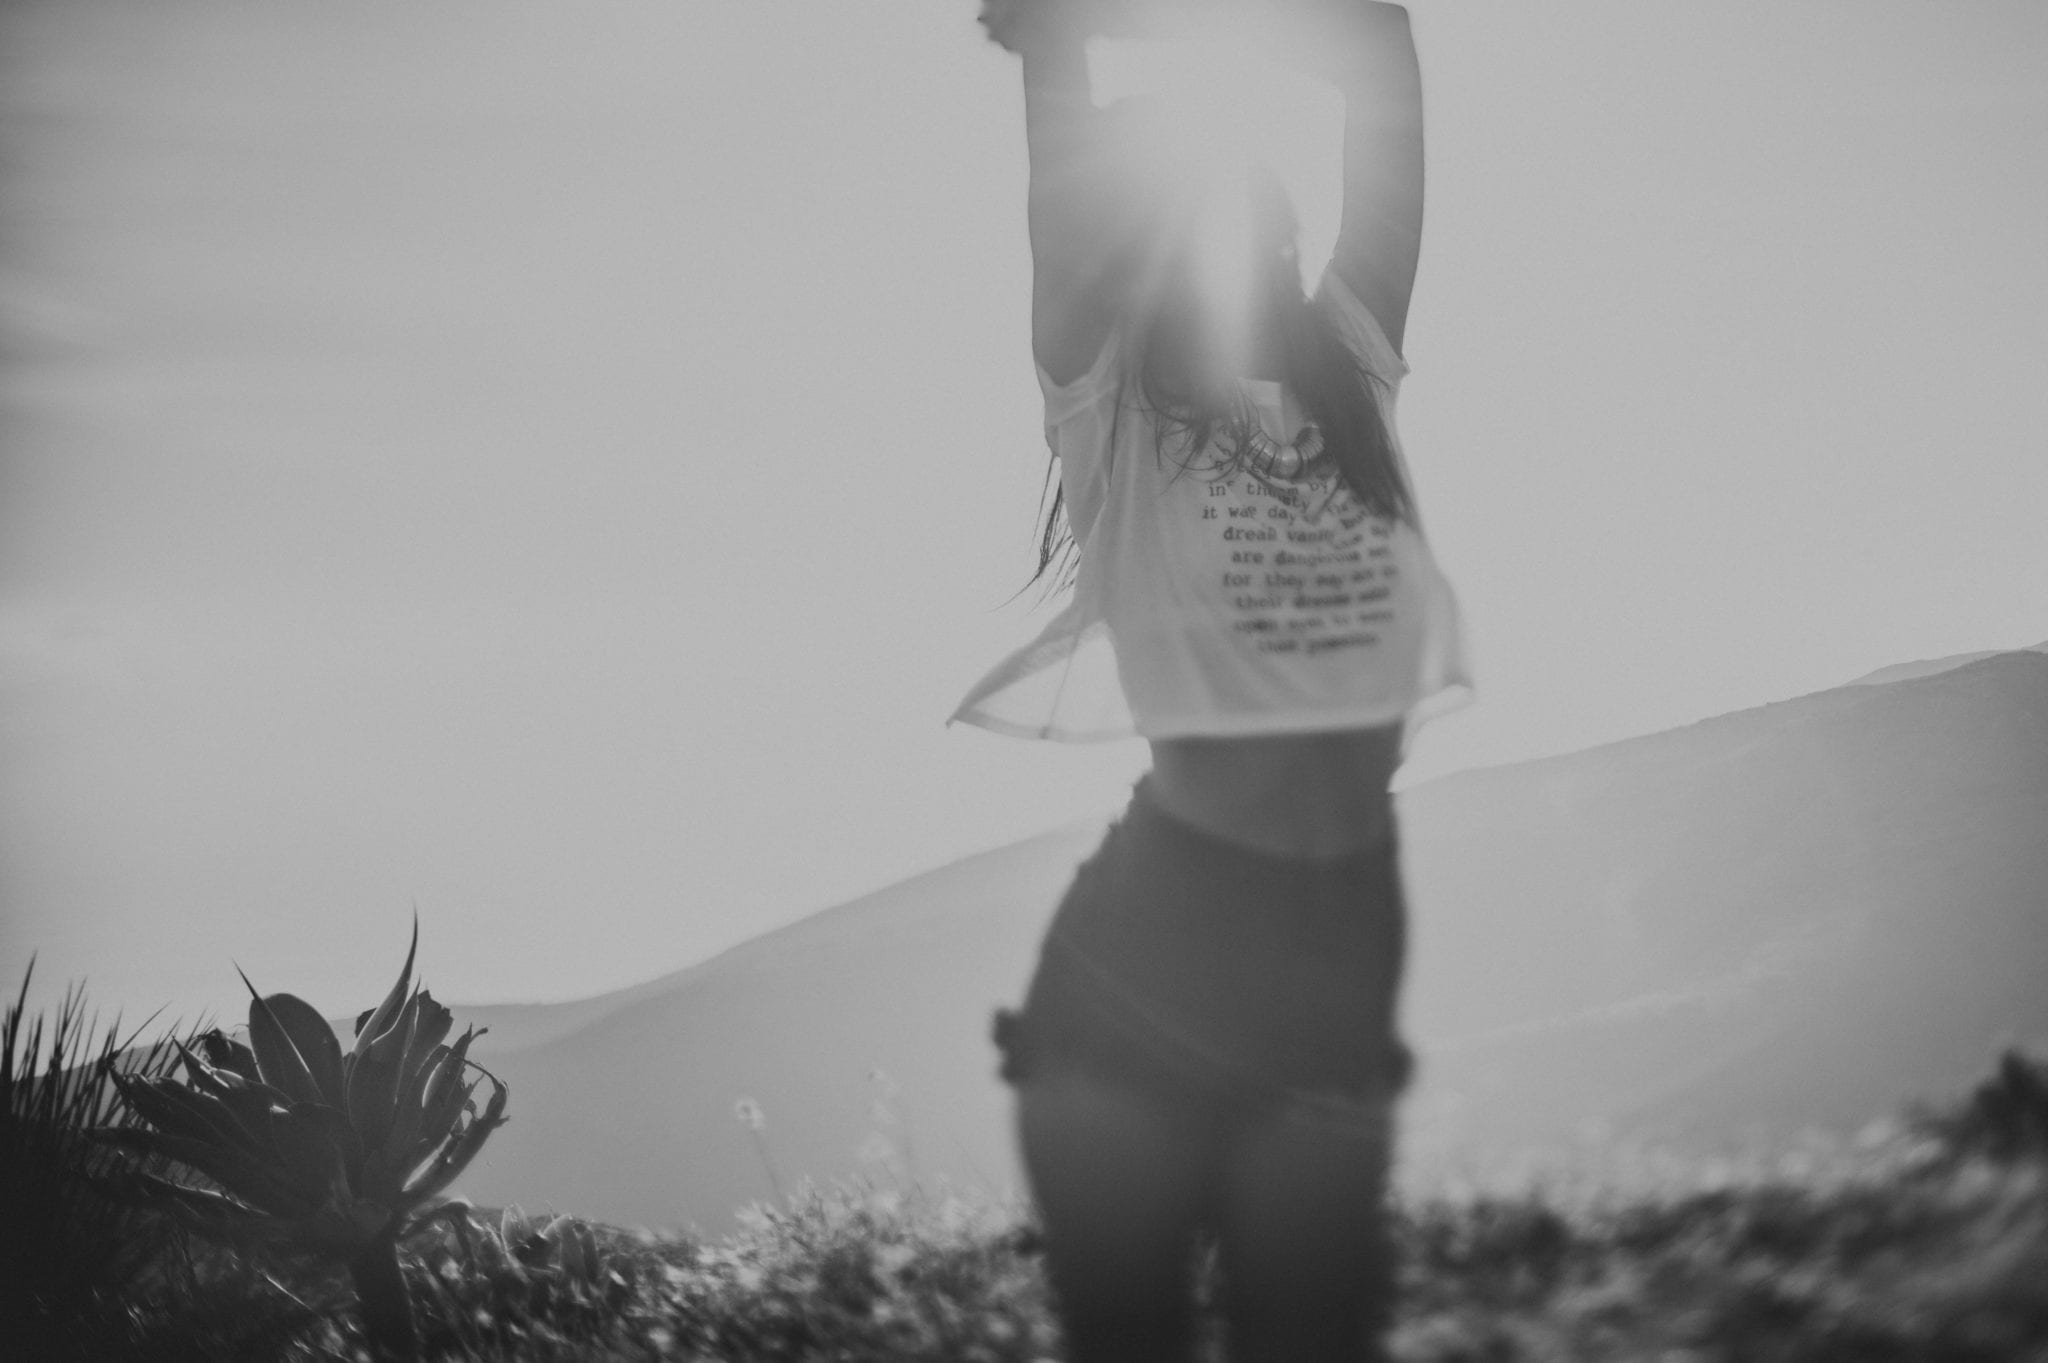 Blurry black and white photo of a young female wearing a short white top with writing and short black shorts. She has her arms raised in the air with the sun filtering through.